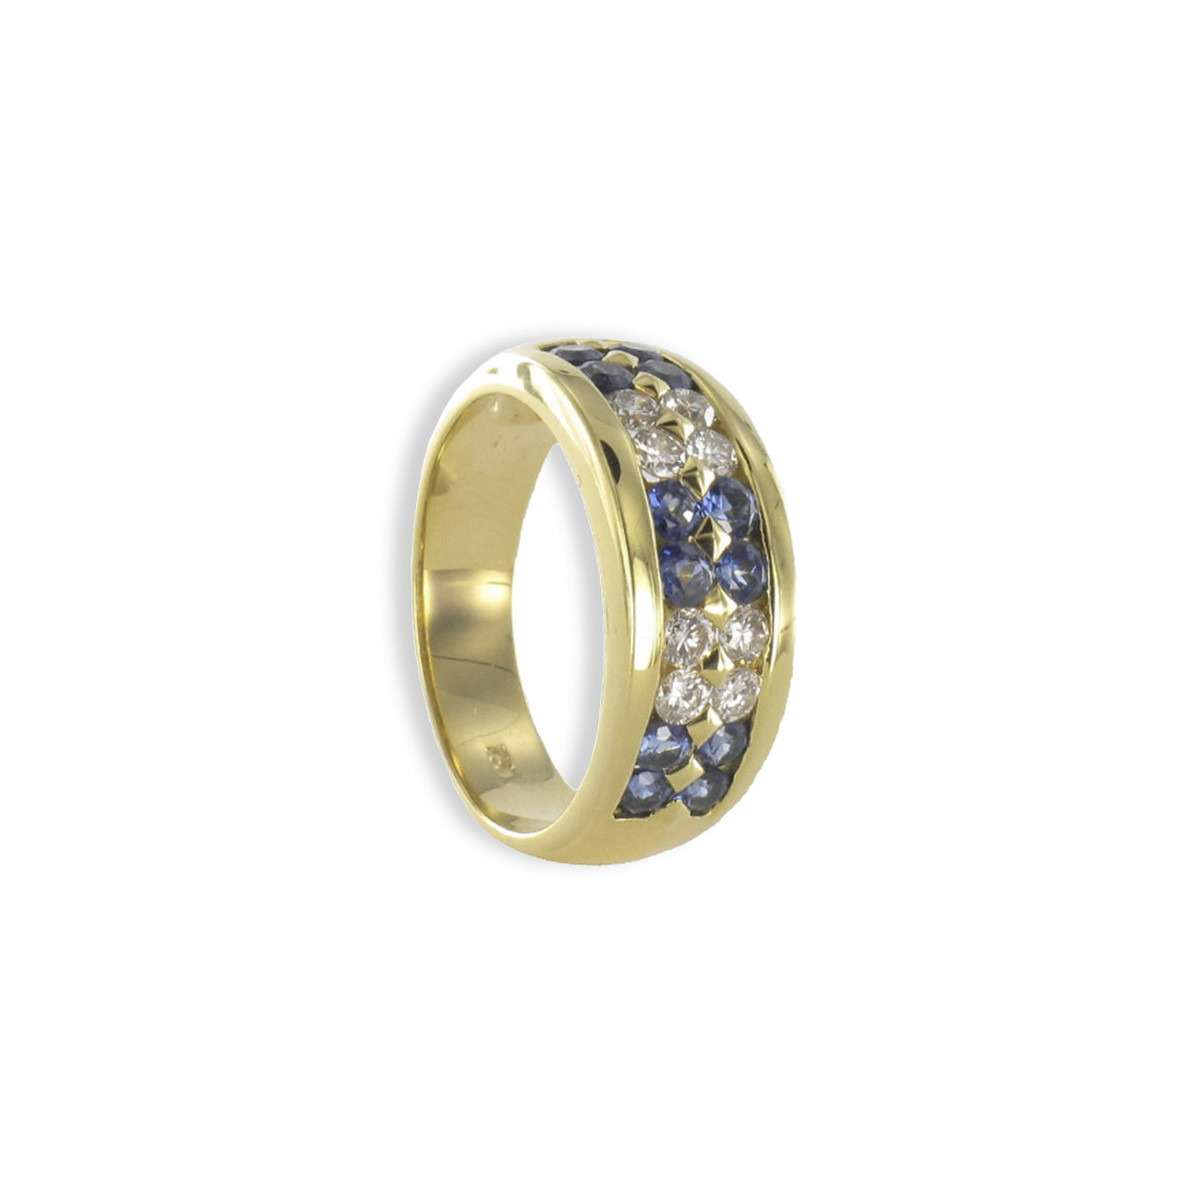 GOLD RING 5 FLOWERS DIAMONDS AND SAPPHIRES